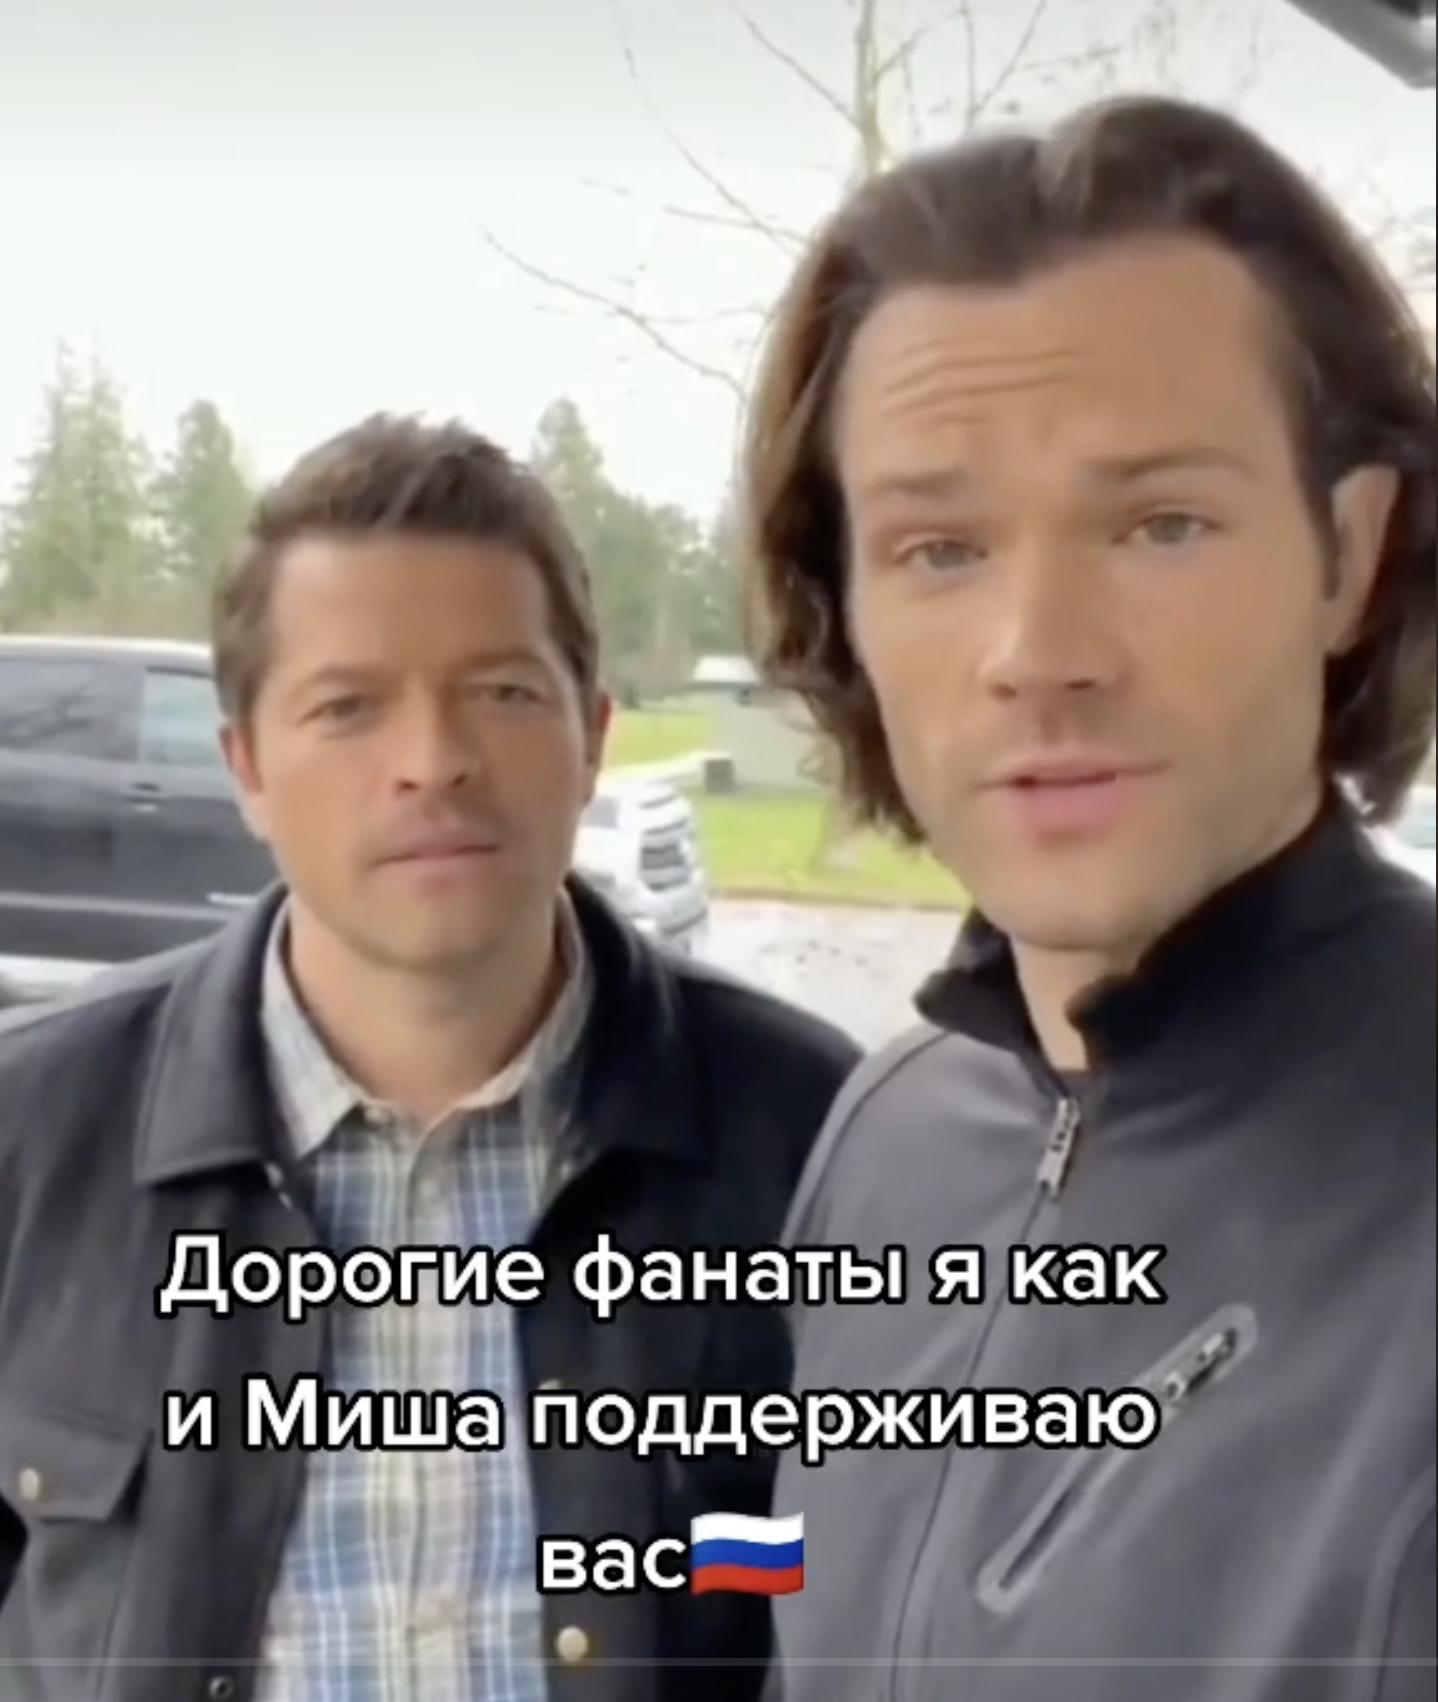 ''Glory to Ukraine!'' The star of the TV series ''Supernatural'', who allegedly supported Russia, has set the record straight